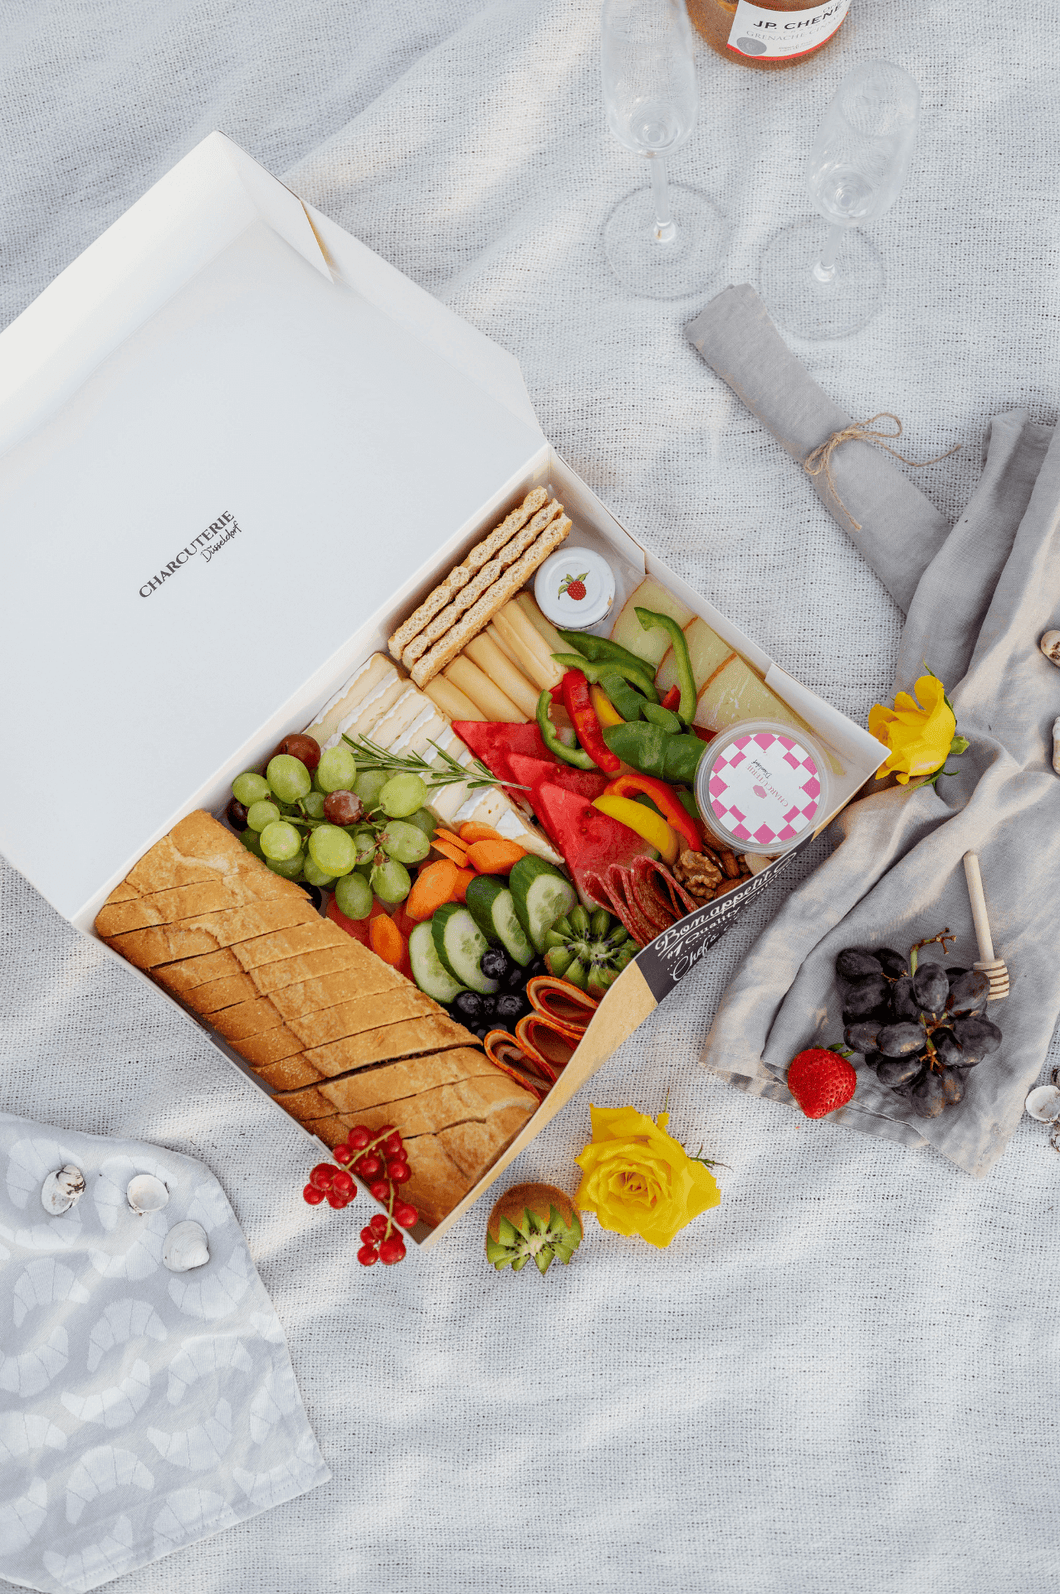 A charcuterie Box is laying on the floor. The food box has different ingredients inside it such as Bread, cheese, meat, fruits, vegetables, dips, nuts and more. The box is beautifully decorated with some decoration beside it.